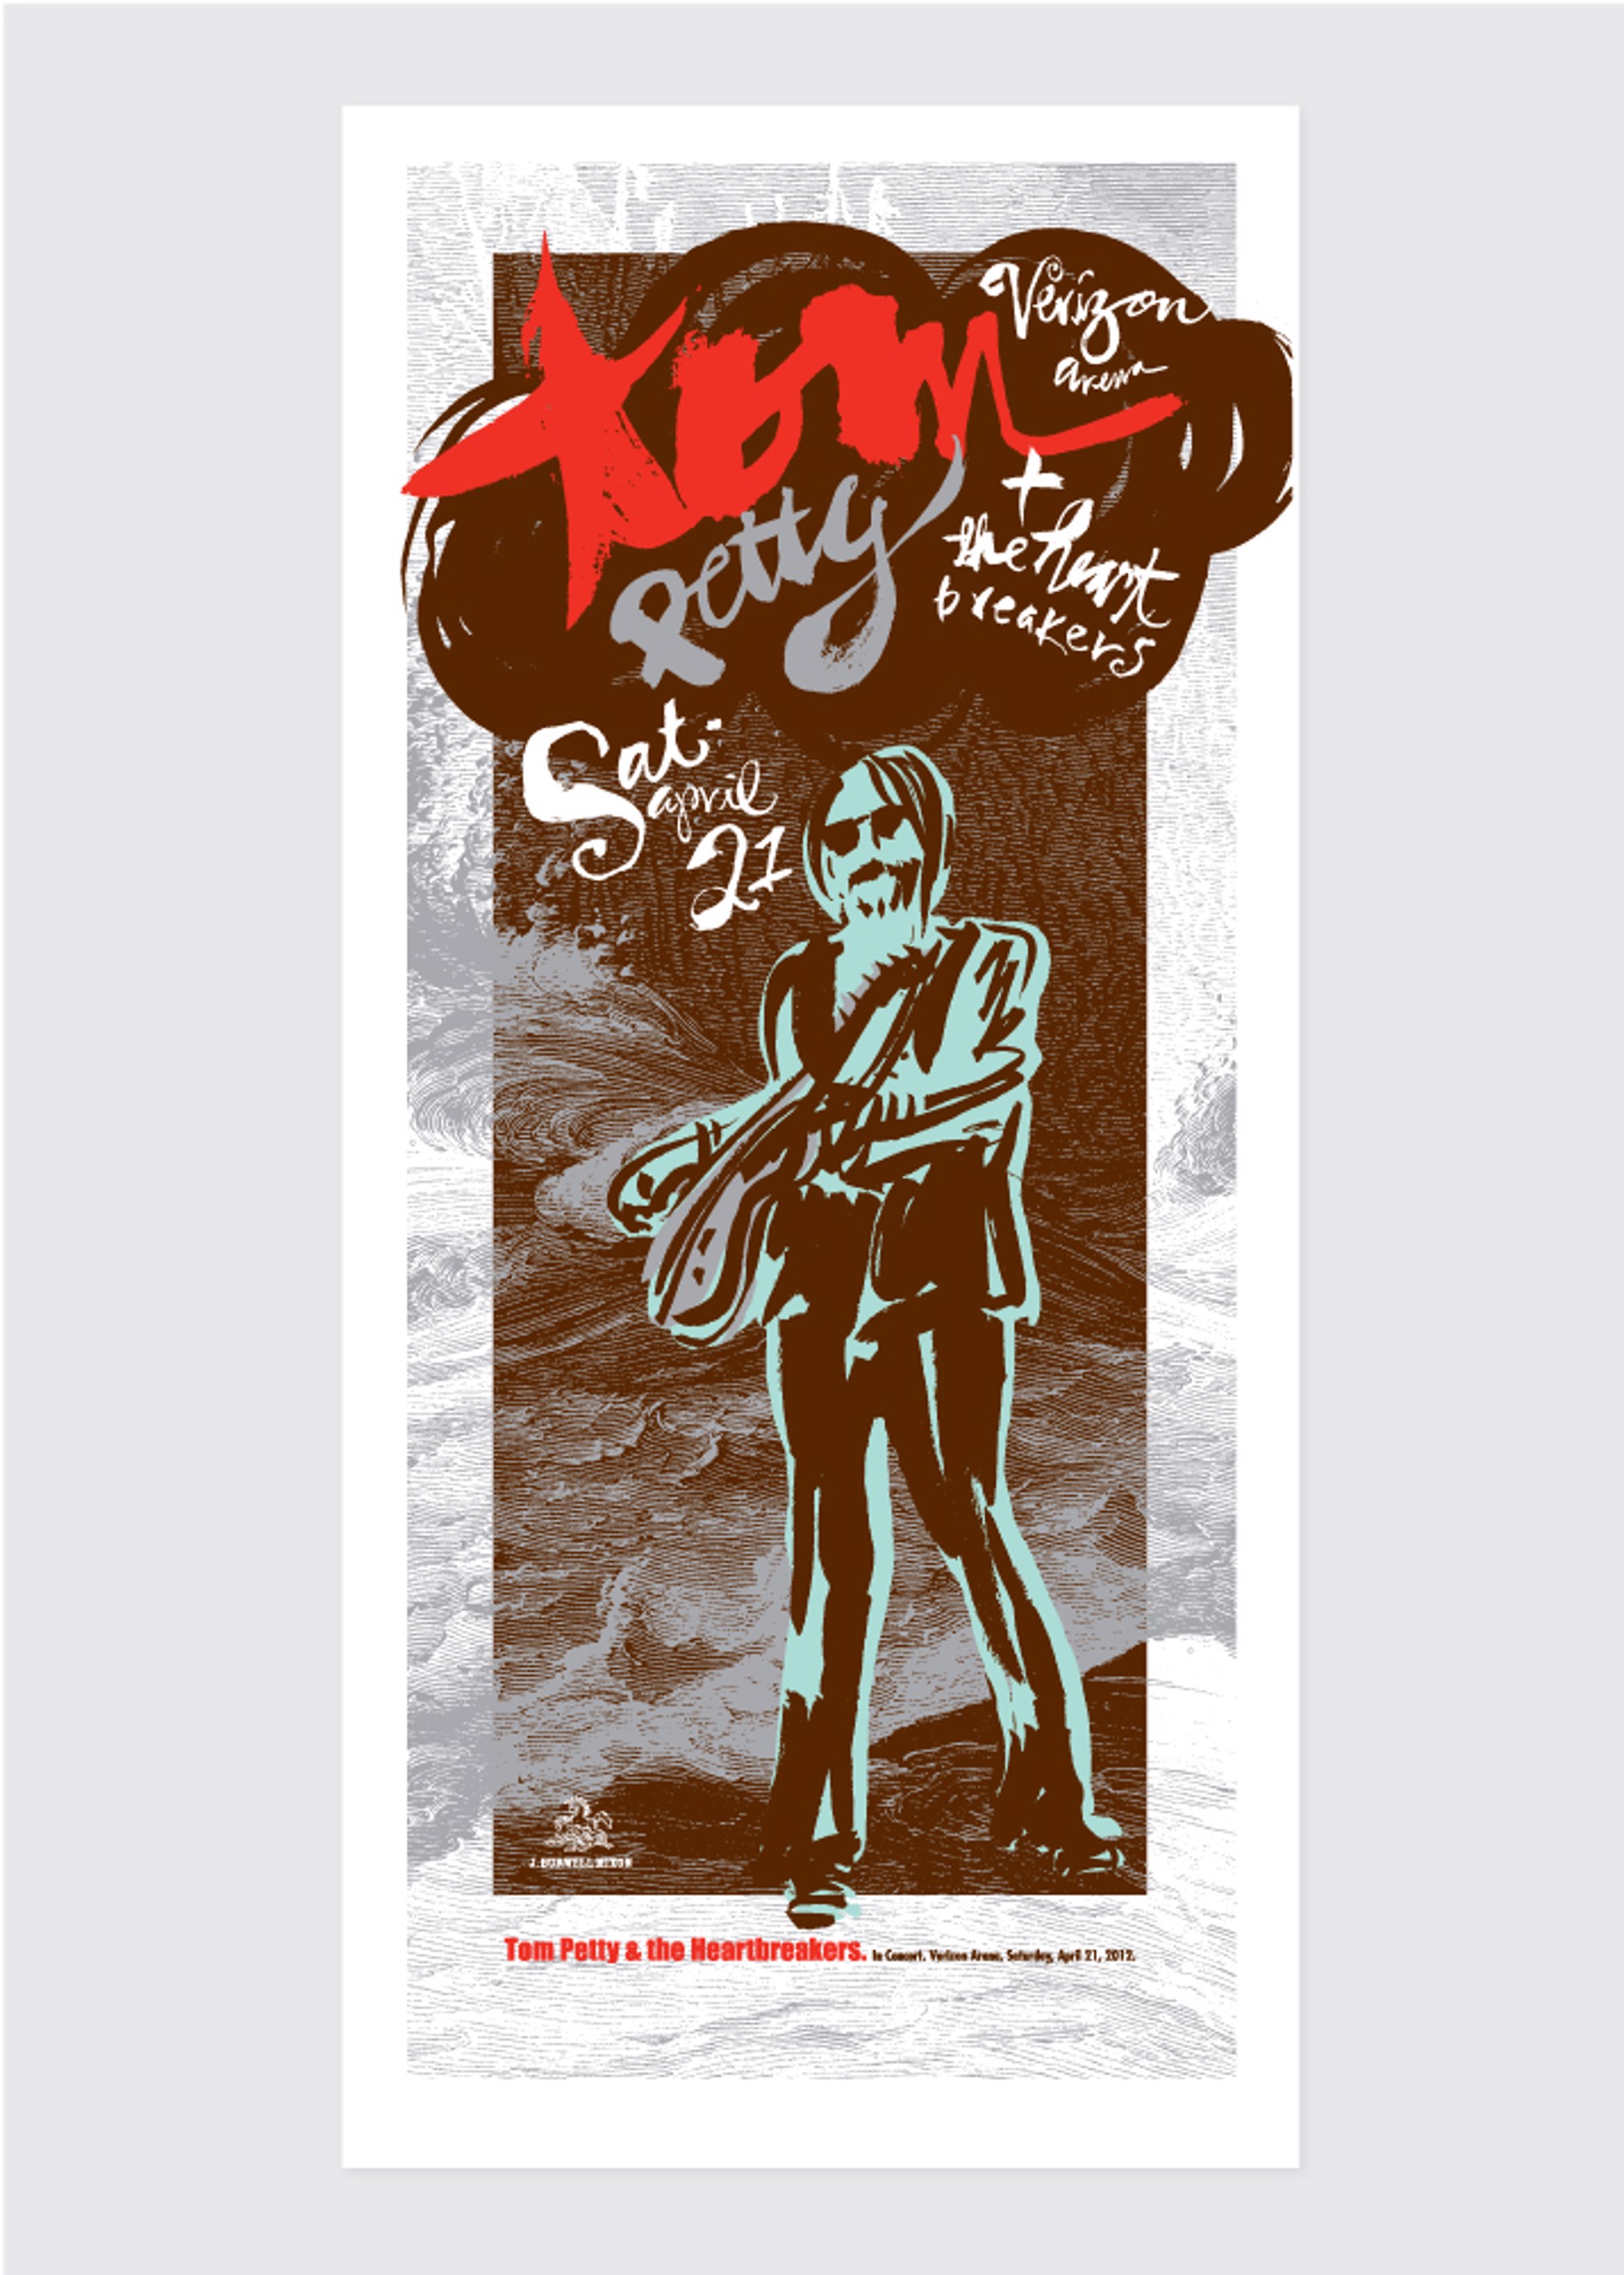 Tom Petty Concert Poster 2012 by Jamie Burwell Mixon